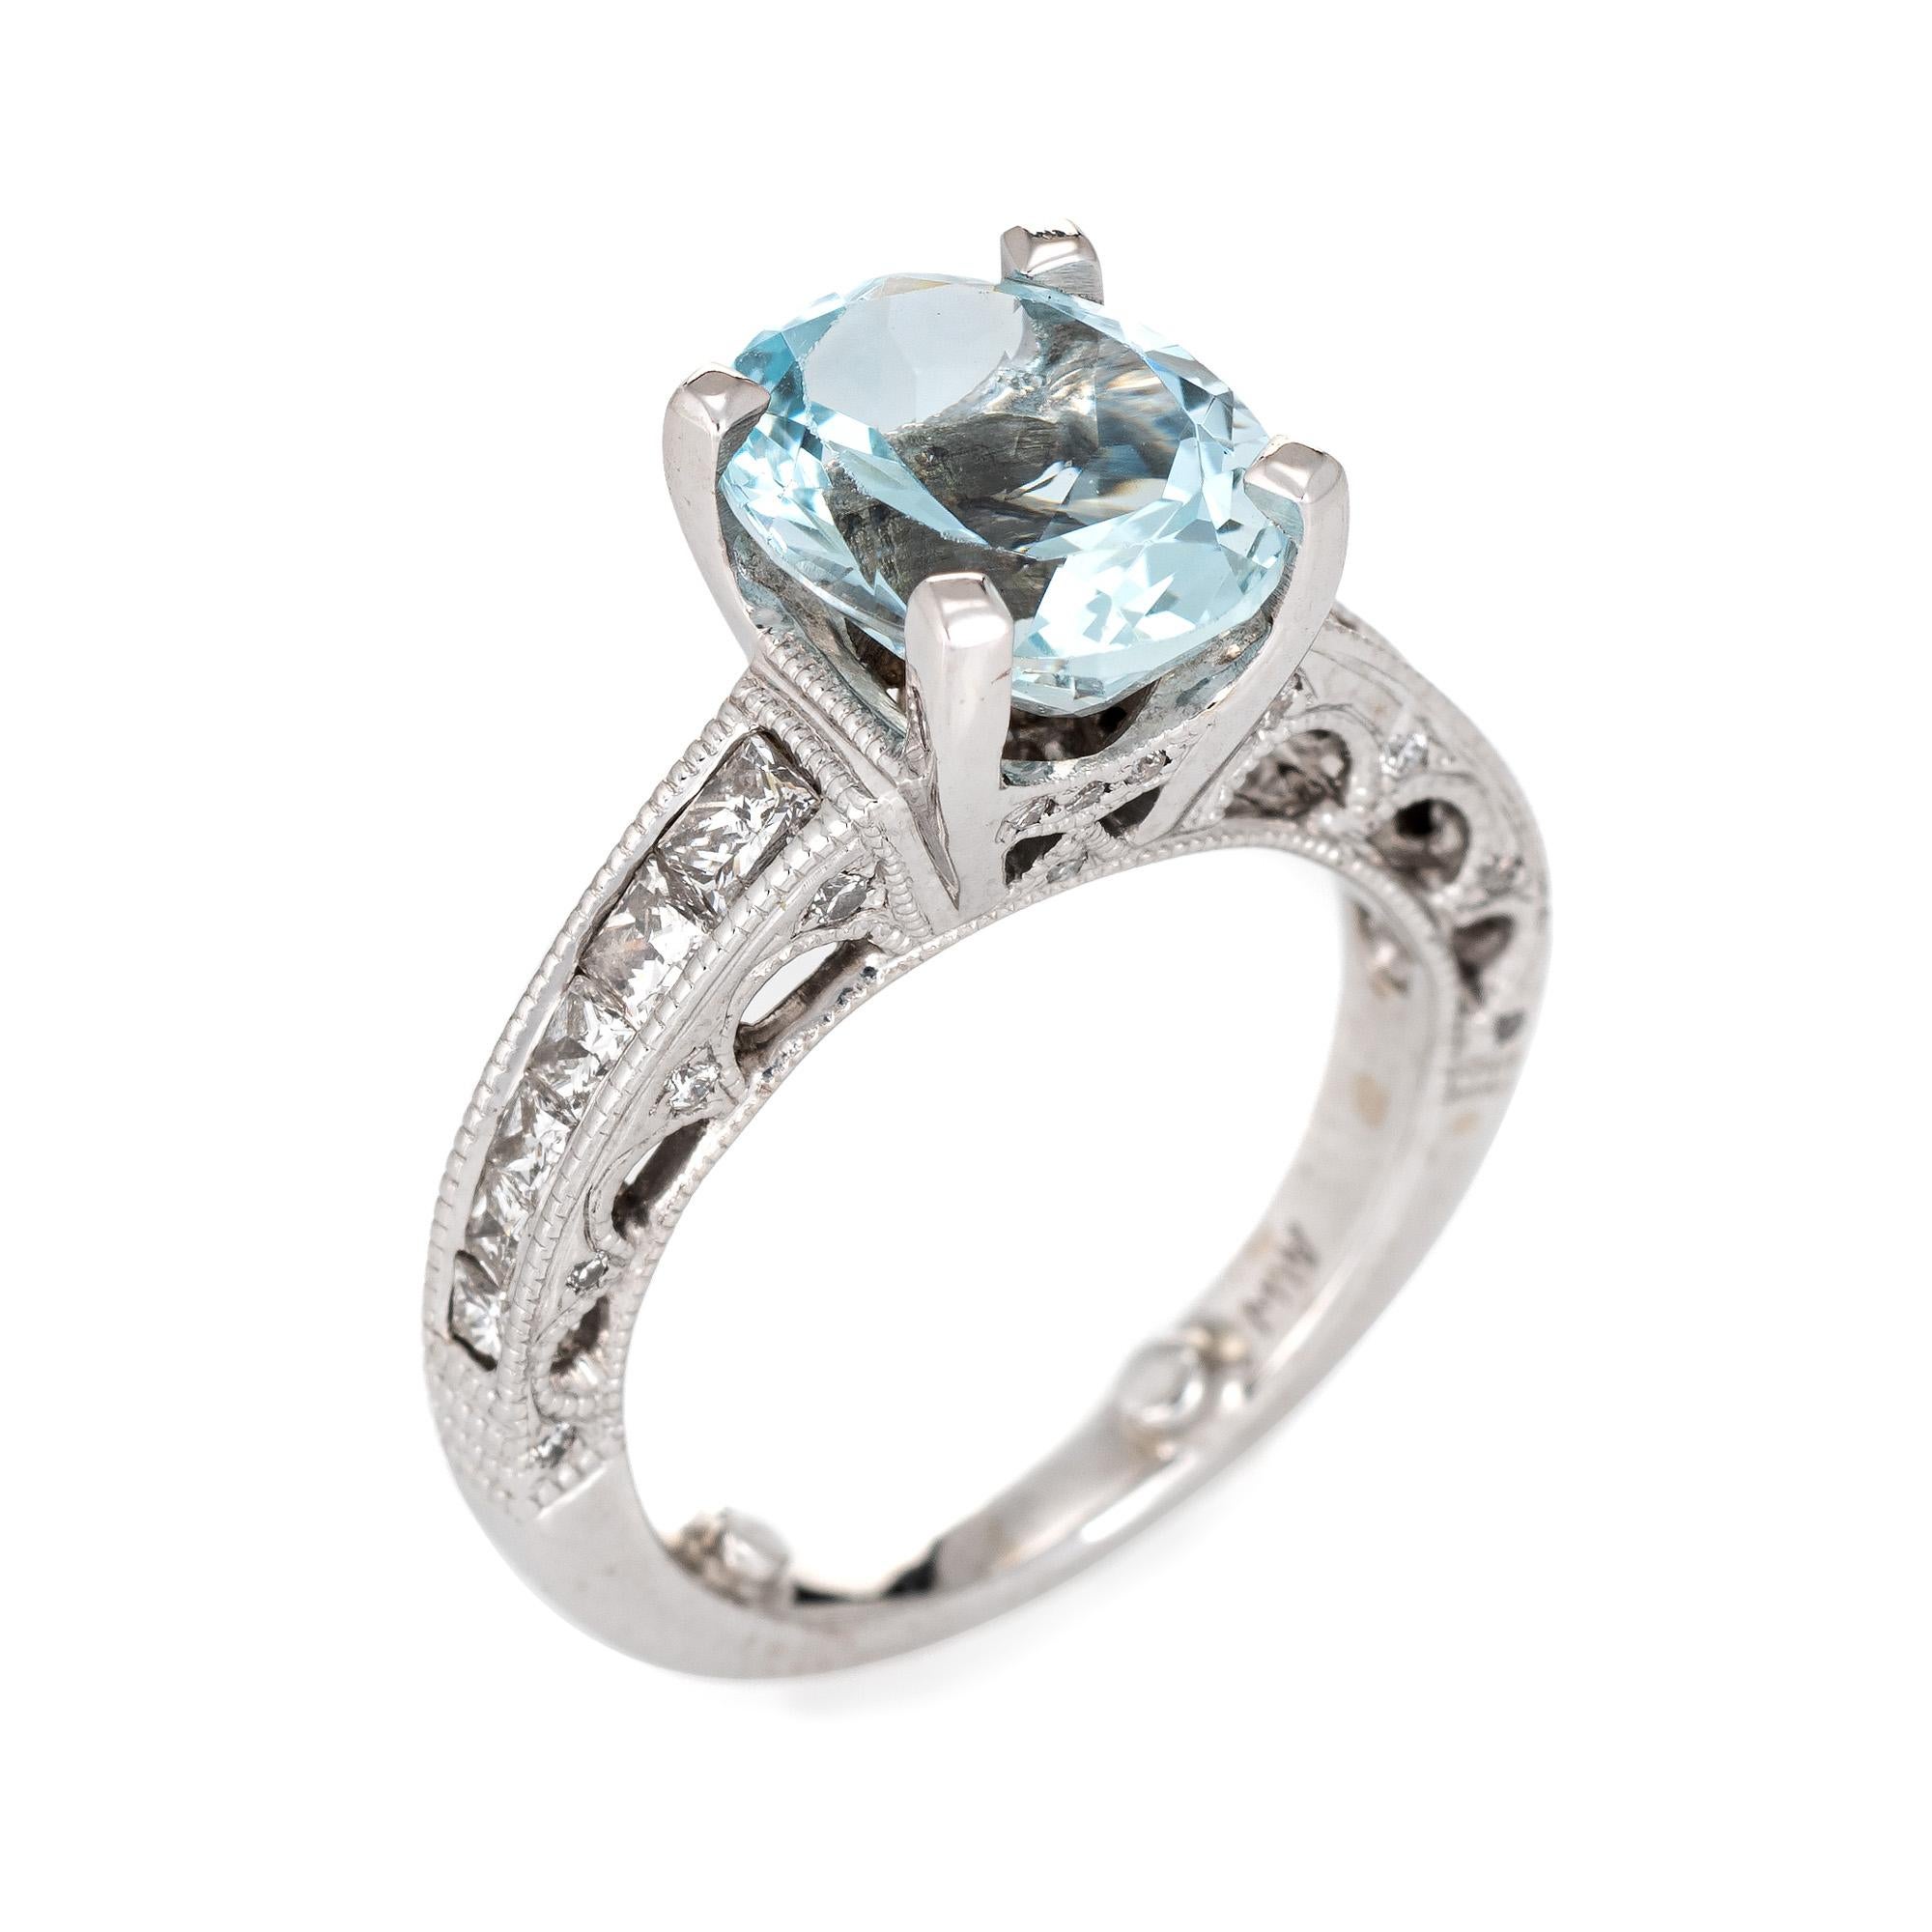 Stylish vintage aquamarine & diamond ring crafted in 18 karat white gold. 

Faceted oval cut aquamarine is estimated at 3 carats, accented with an estimated 0.62 carats of mixed cut diamonds (princess and round cut). The diamonds are estimated at